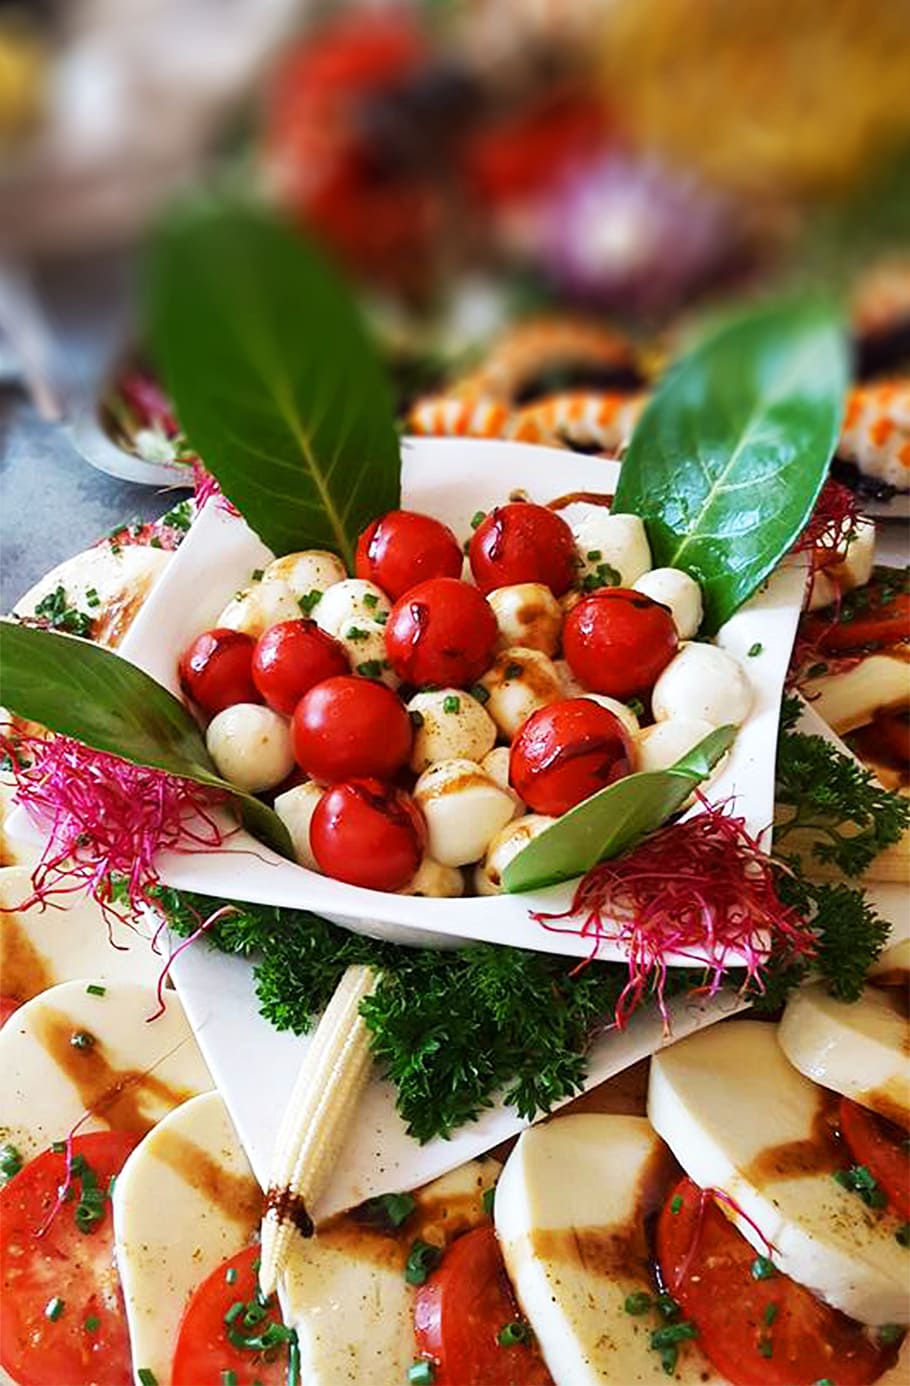 Restaurant, Kitchen, Healthy Food, Salad, tomato, vegetable, food and drink, healthy eating, feta cheese, food